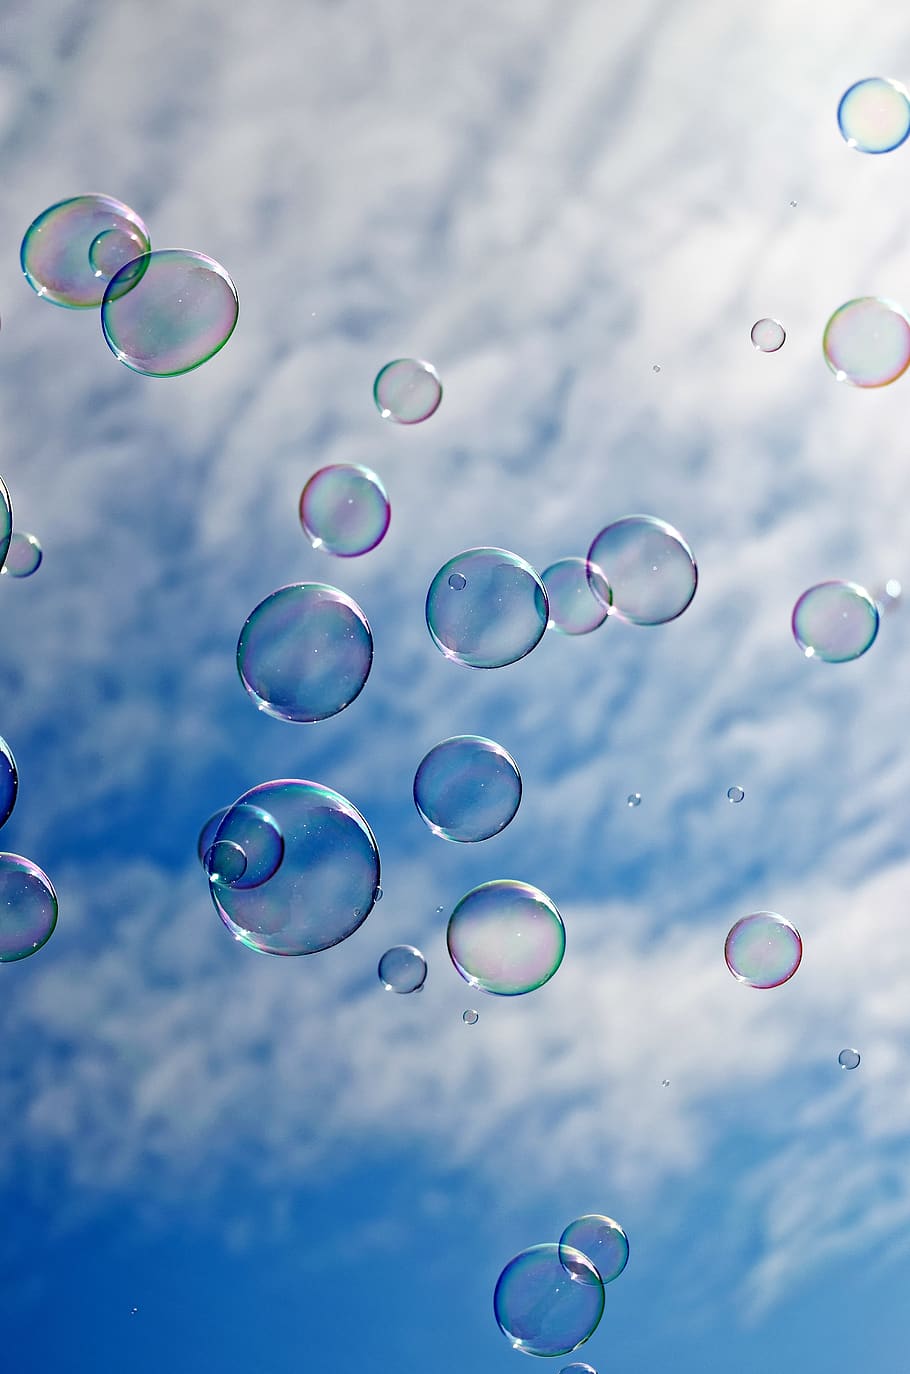 bubbles, transparent, the soap, ball, floating, air, sky, blue, cloud, nice